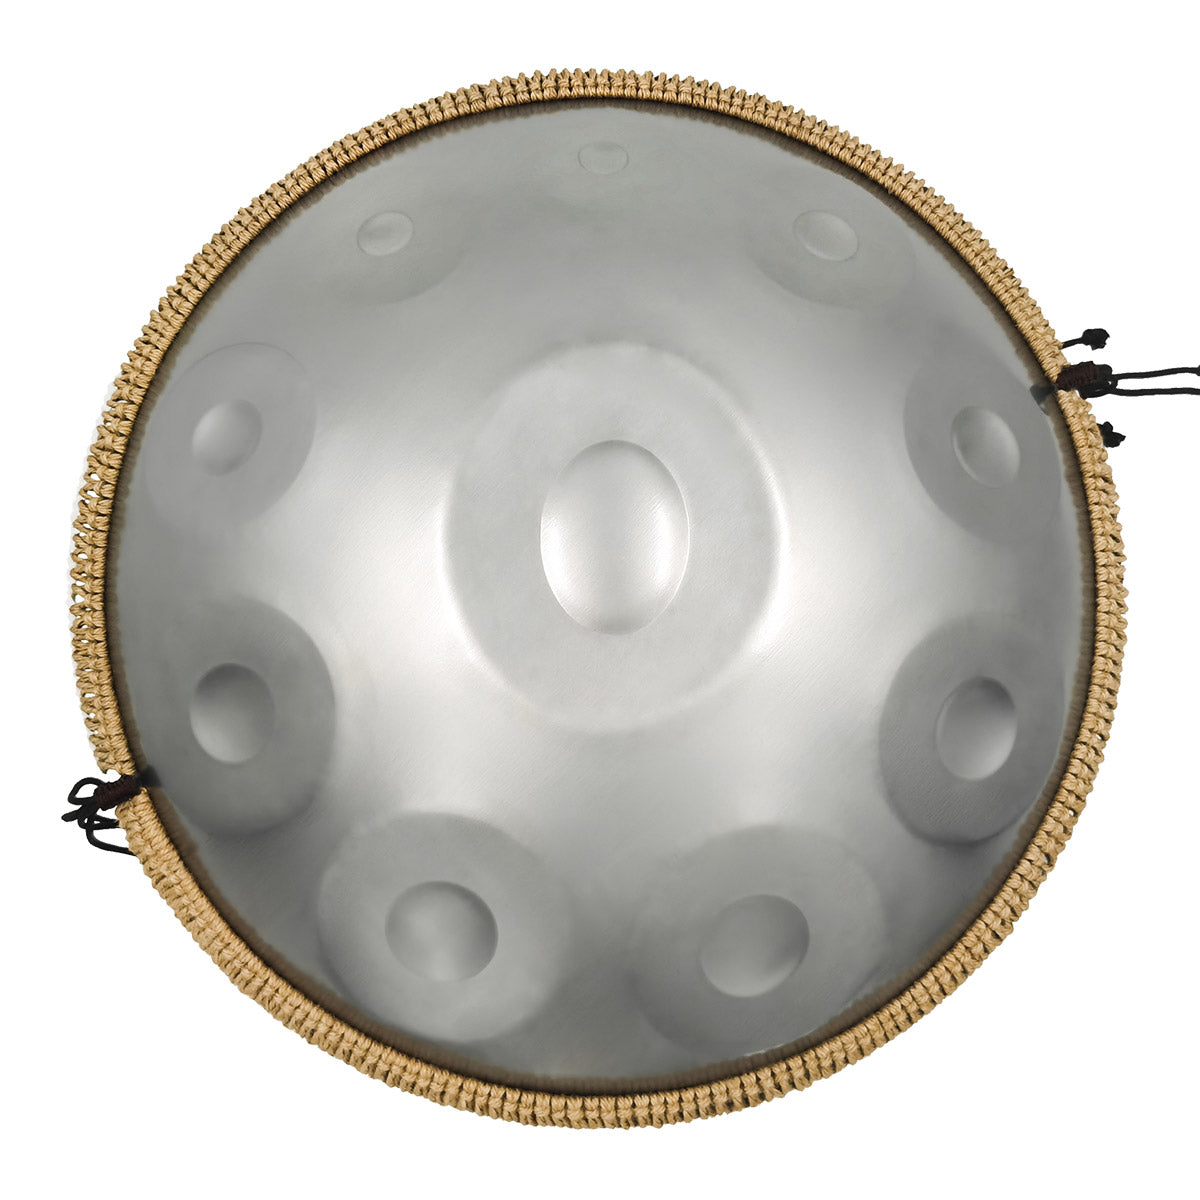 MiSoundofNature STL Handpan Drum Sterling Silver 22 Inches 10 Notes D Minor Kurd Scale Hangdrum